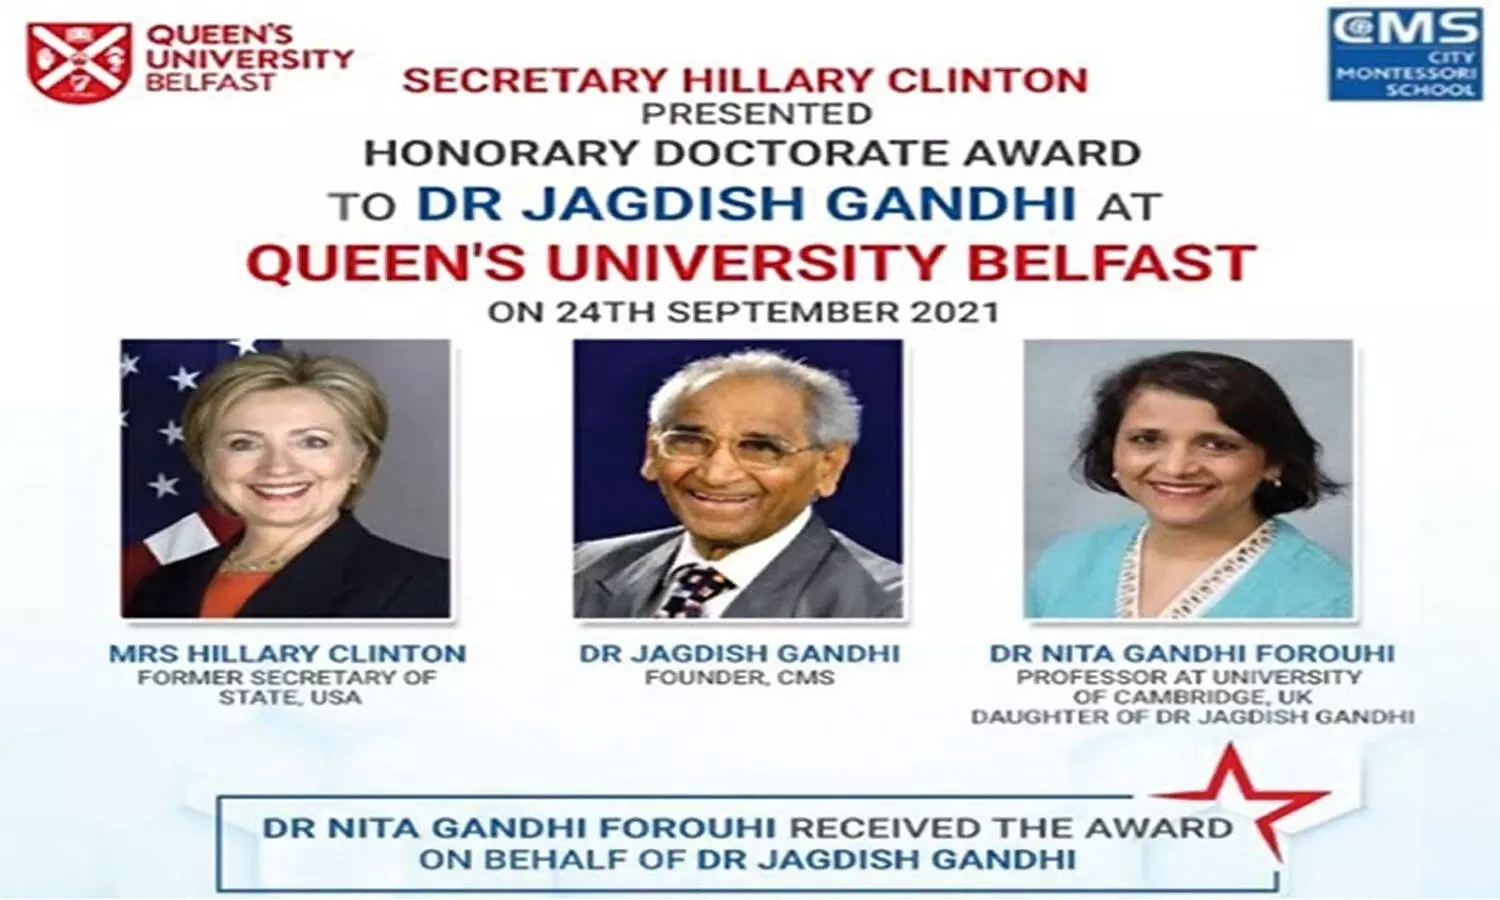 Dr Jagdish Gandhi Awarded an Honorary Doctorate by Queens University Belfast